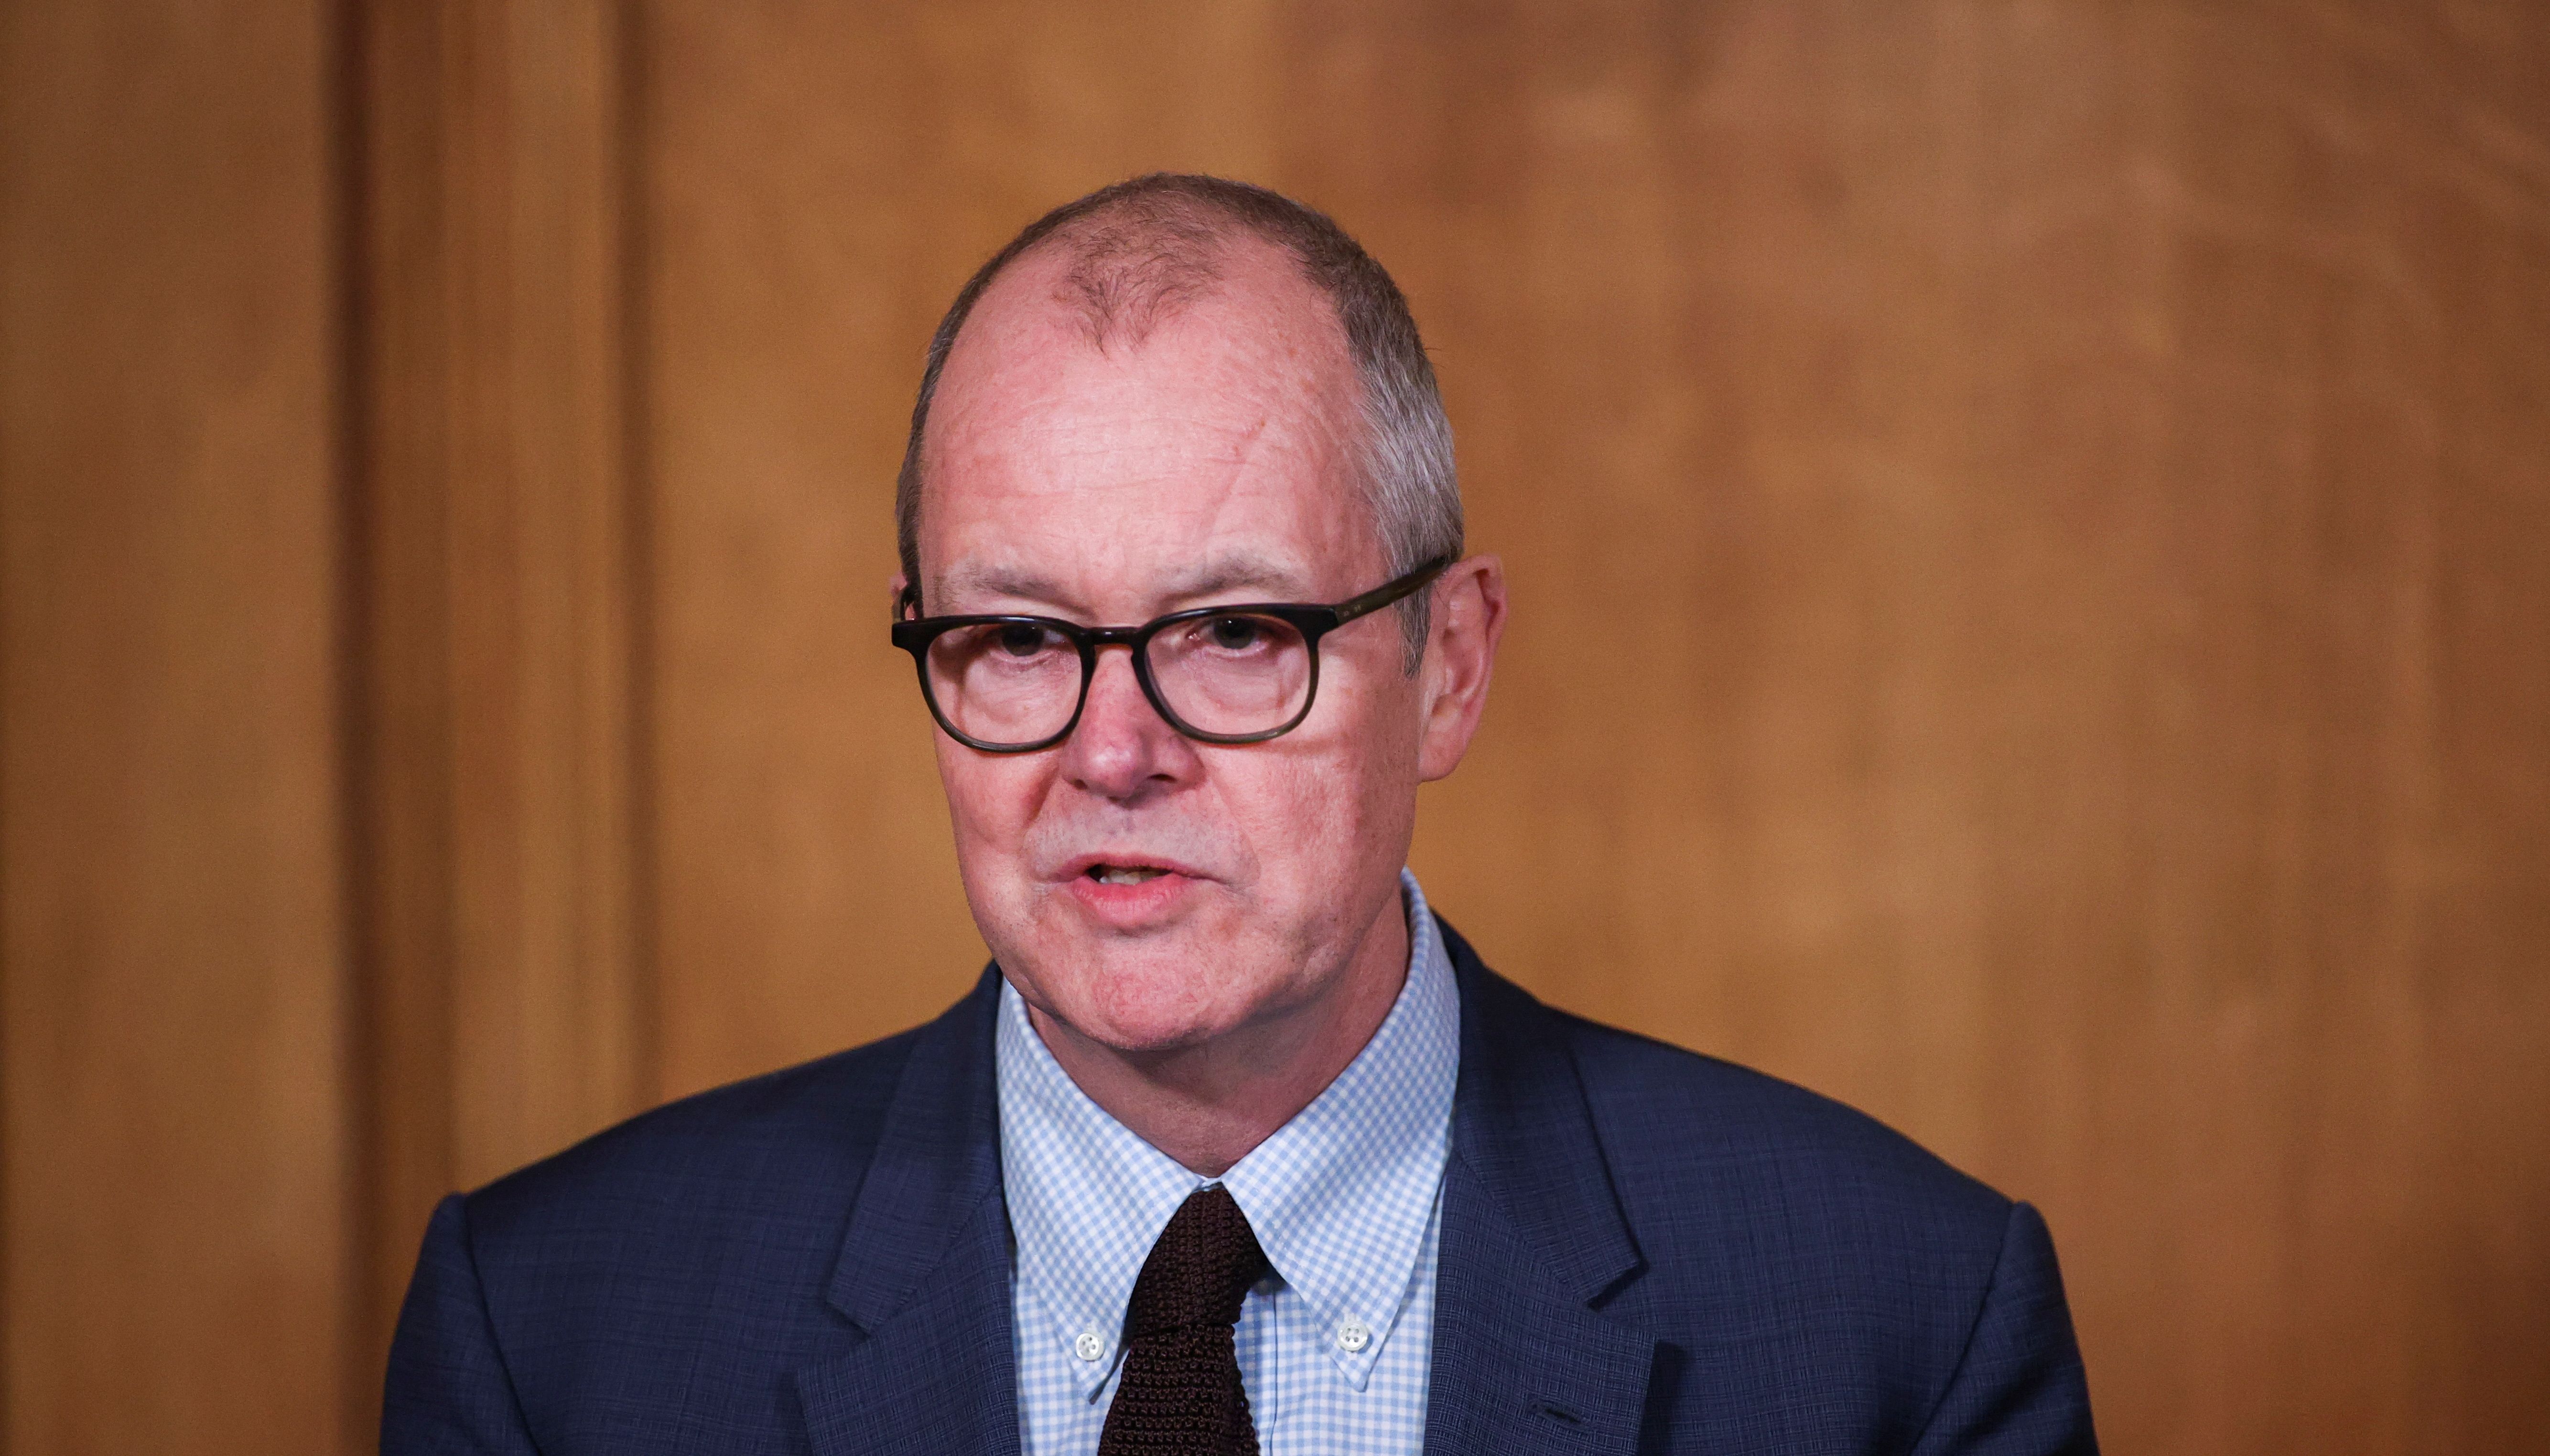 Sir Patrick Vallance was seen regularly at Downing Street press conferences during the height of the pandemic.